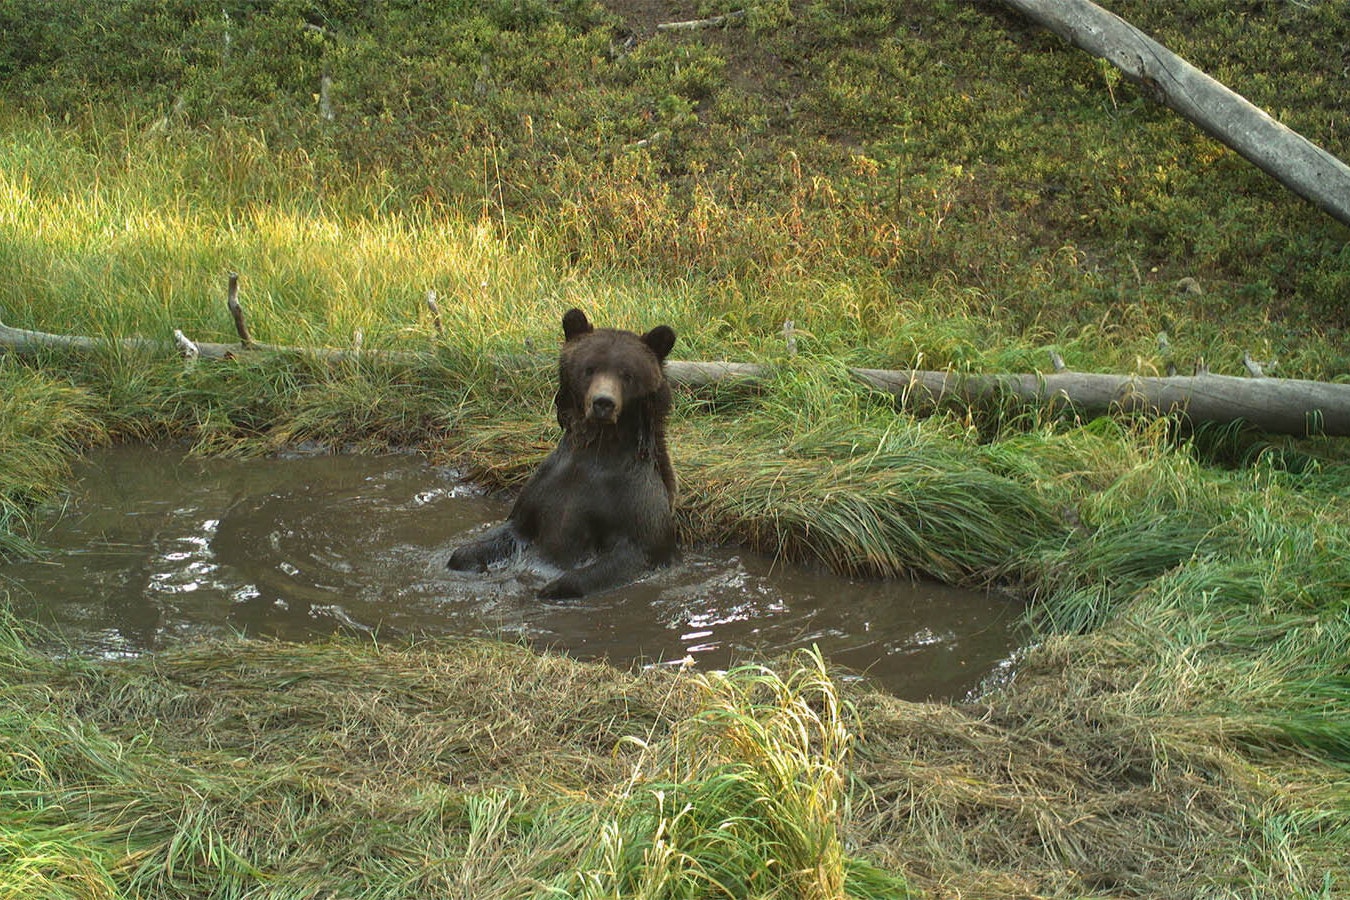 Bears don’t sweat, so they must use small pools in isolated parts of Yellowstone National Park to cool off during the summer.